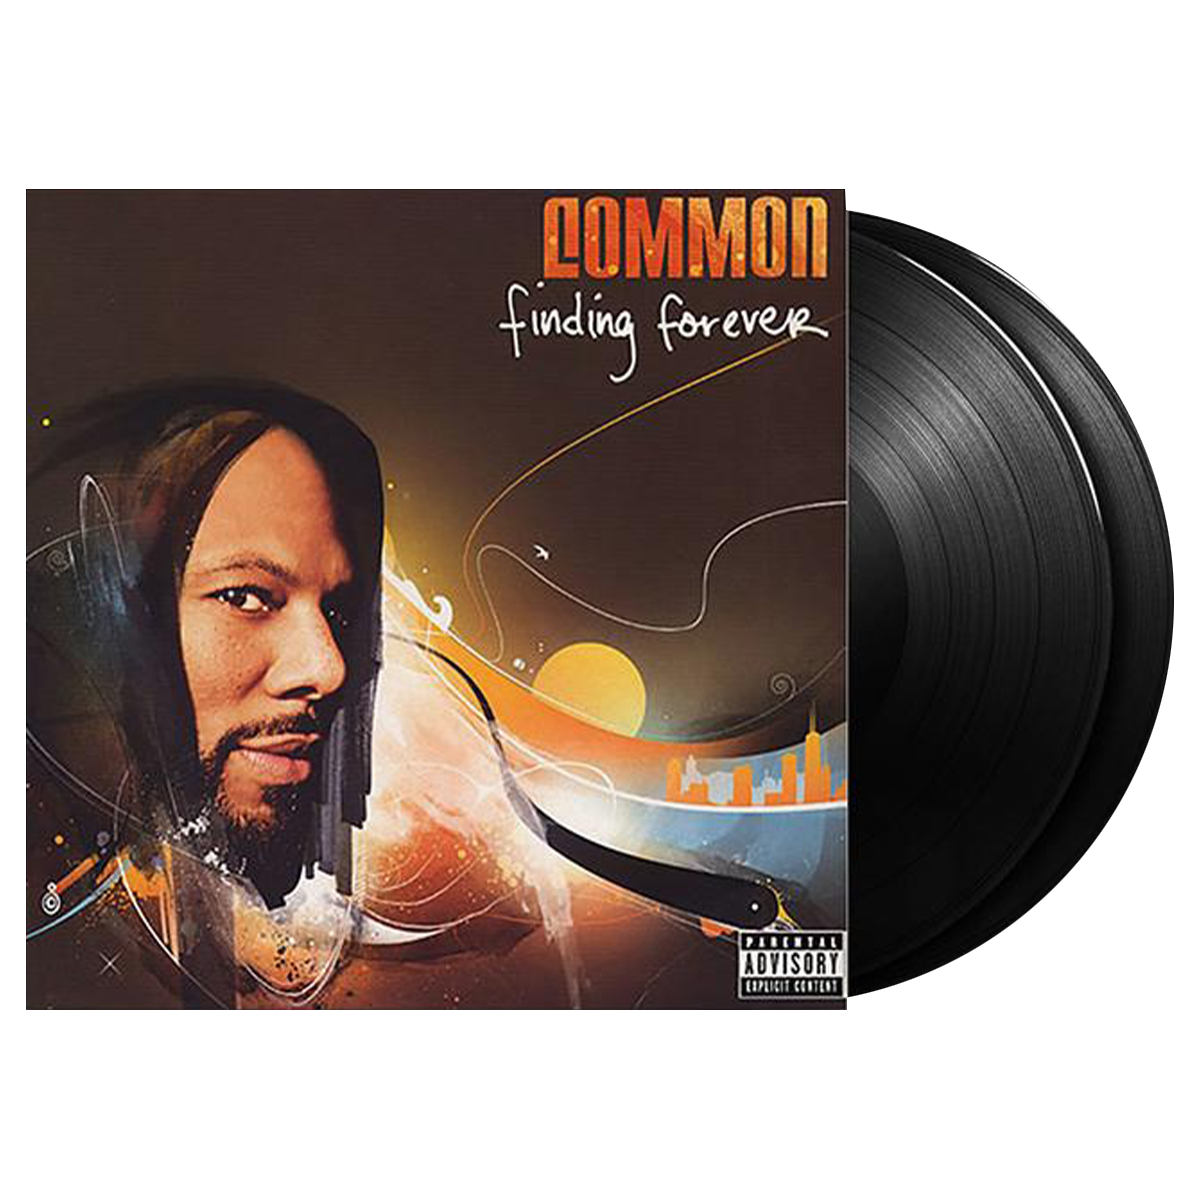 common finding forever album cover